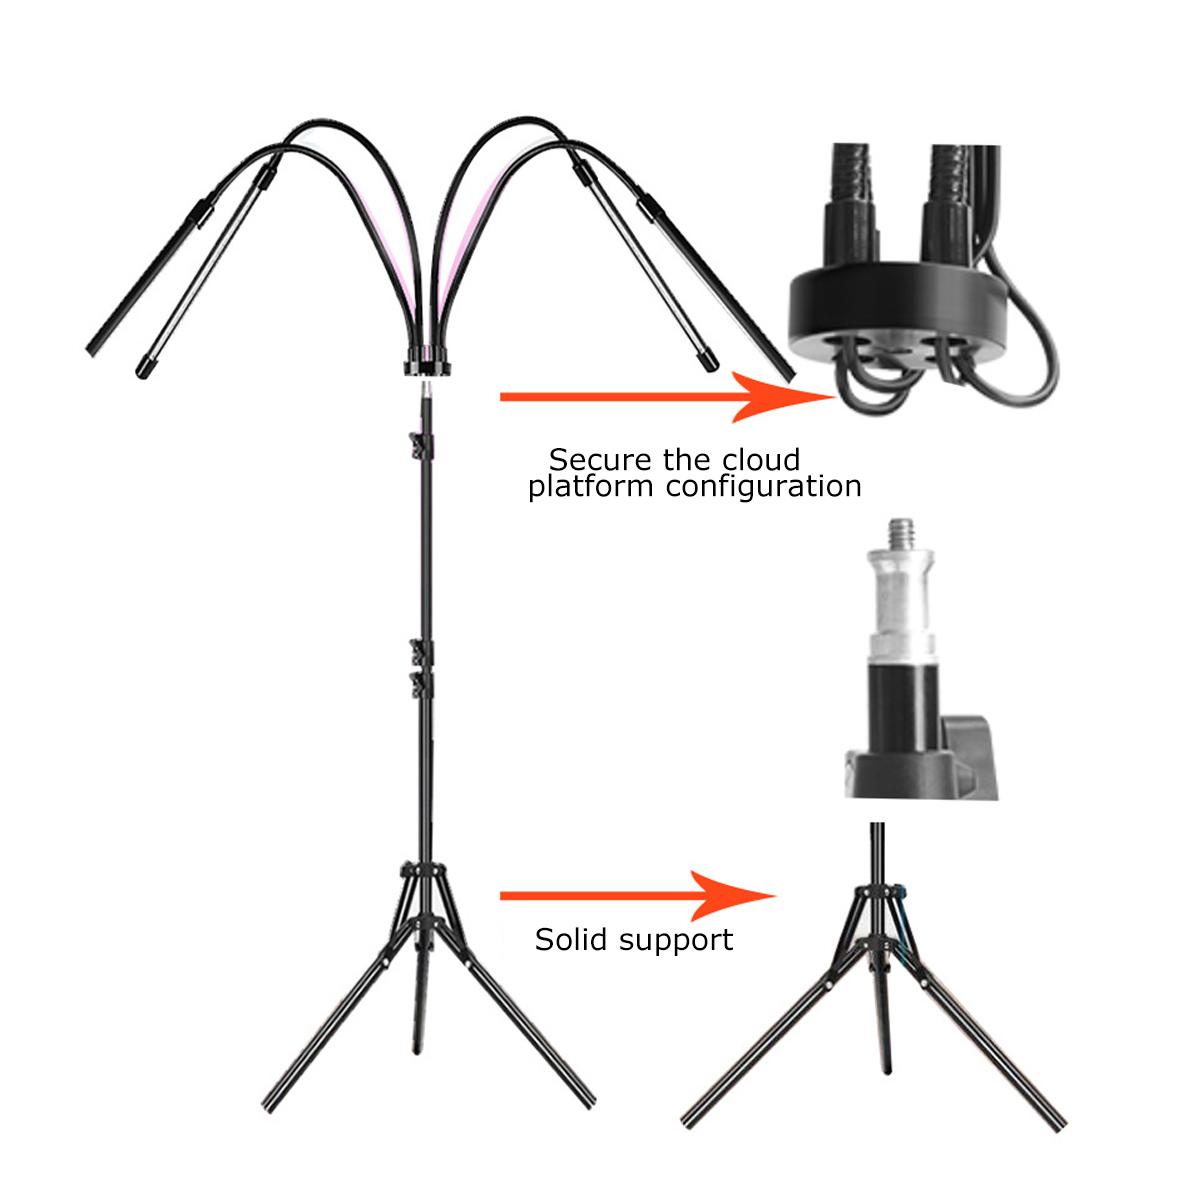 LED-Grow-Light-Tripod-Plant-Growing-Lamp-Lights-With-Tripod-For-Indoor-Plants-1836993-5